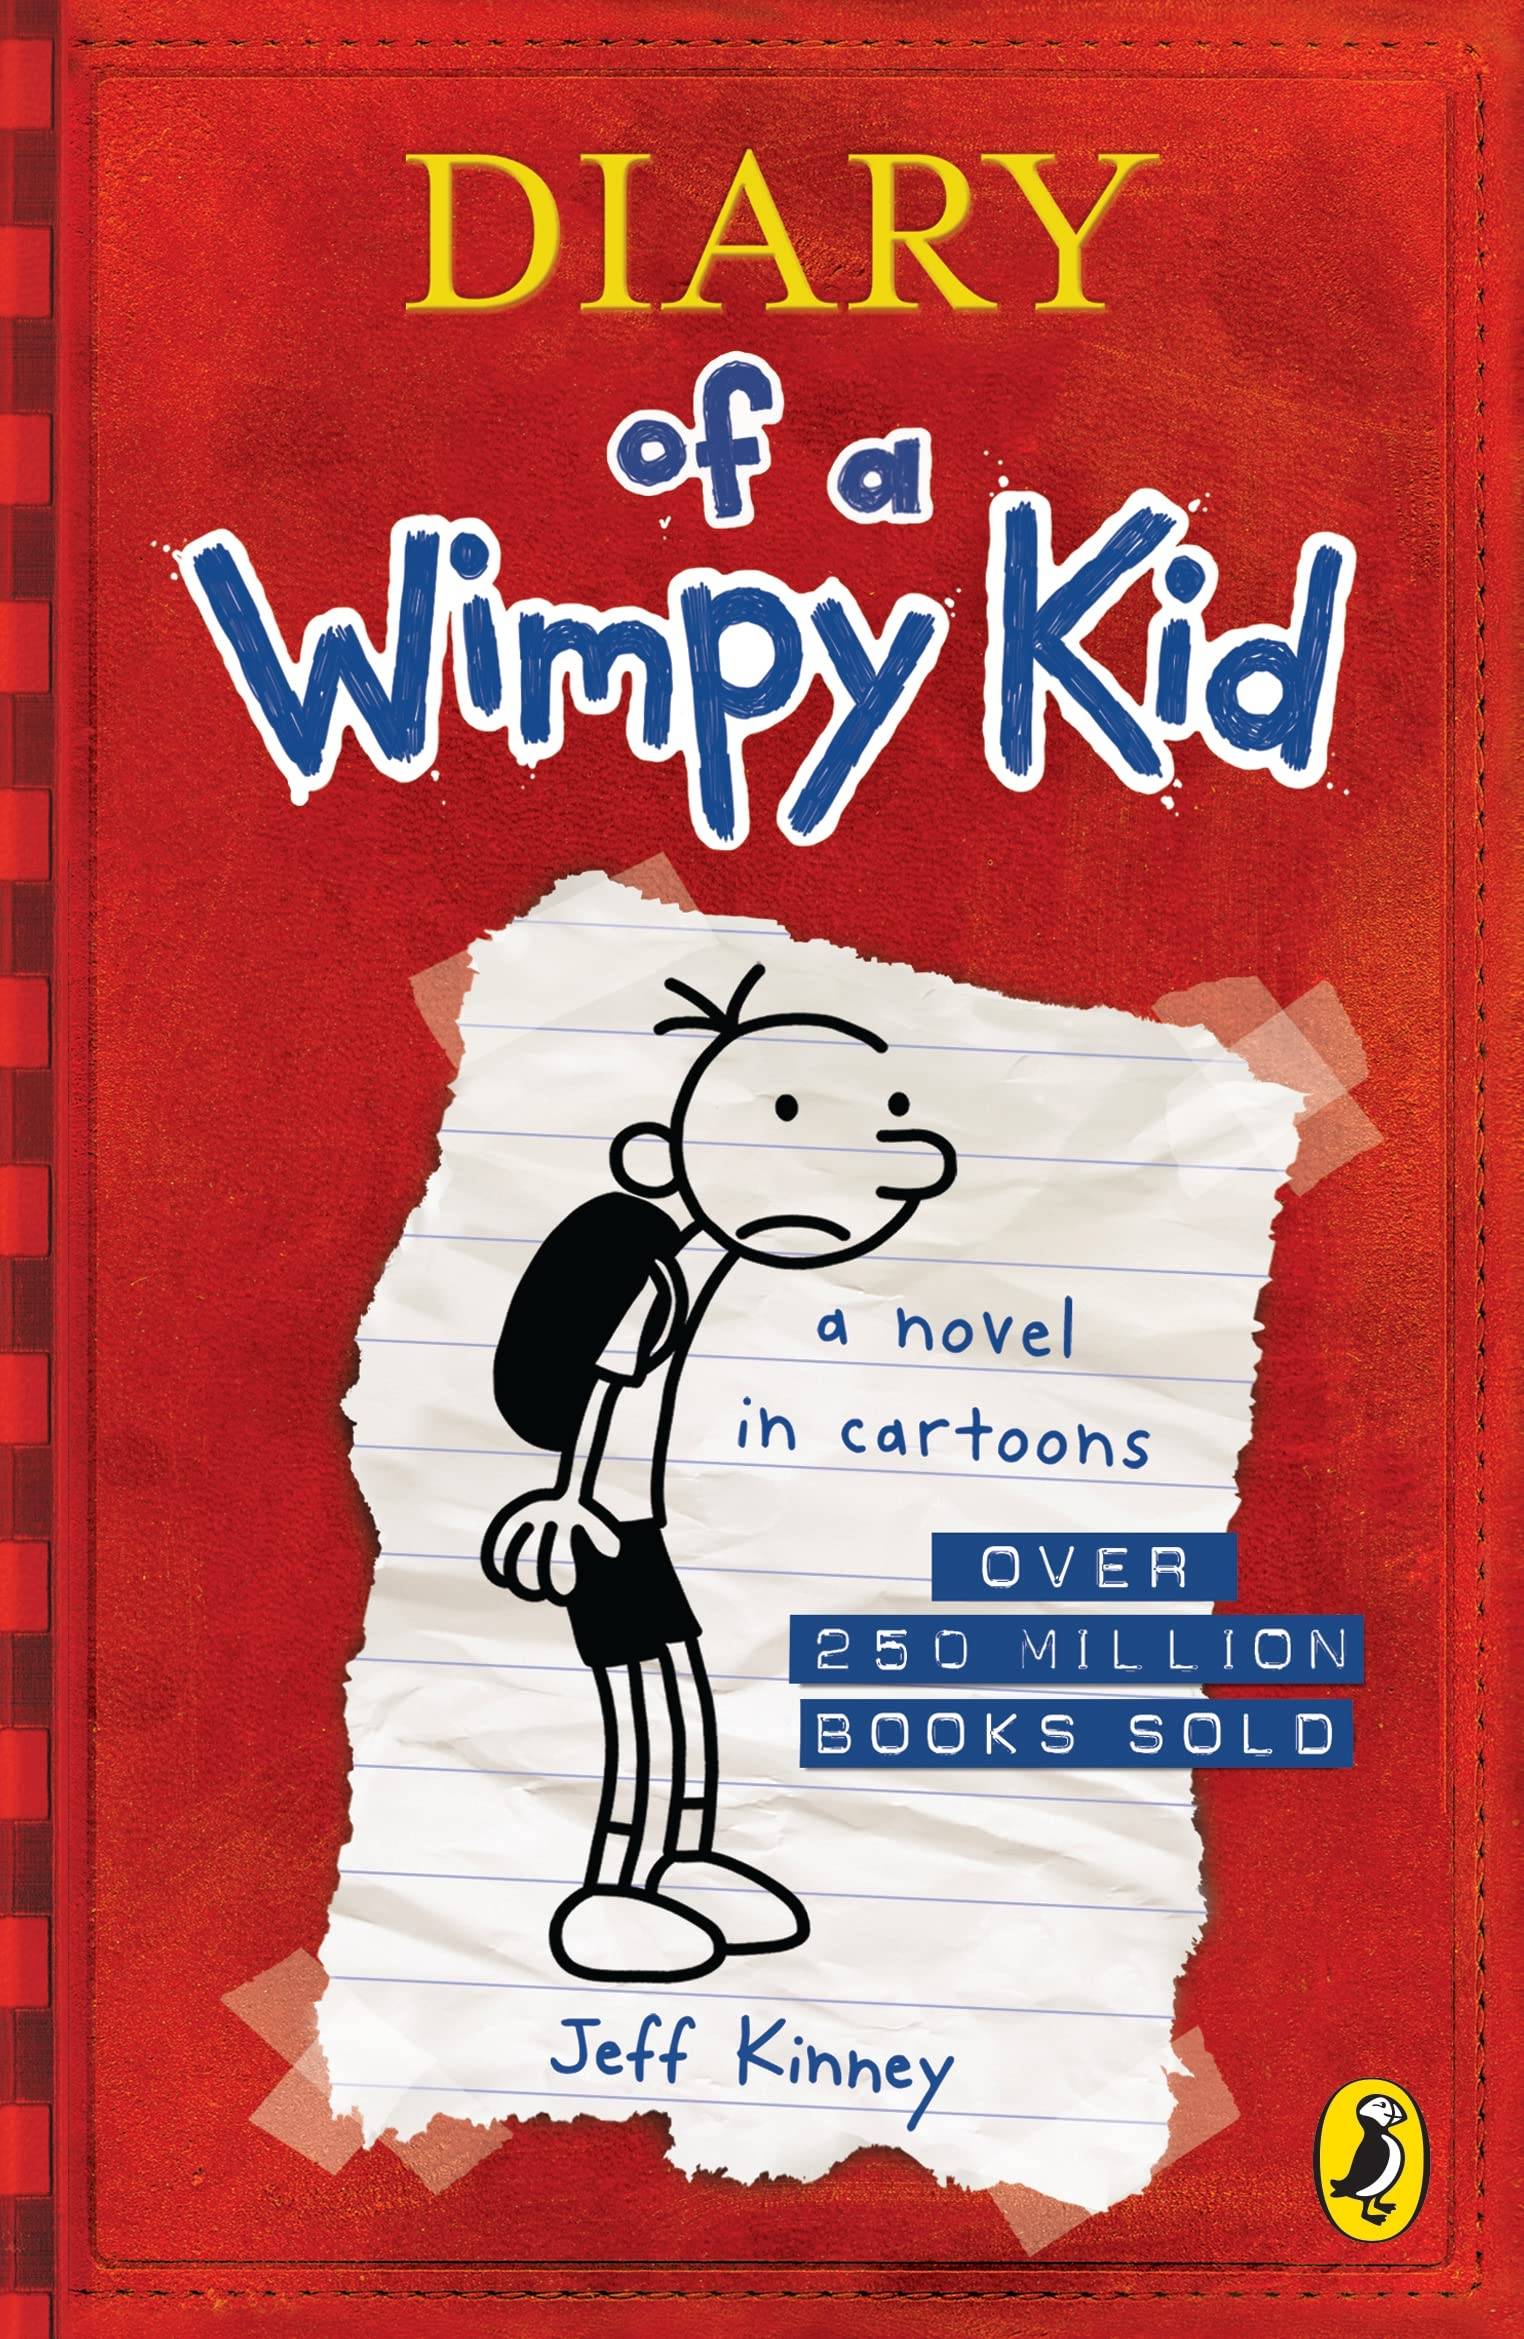 IMG : Diary of wimpy kid